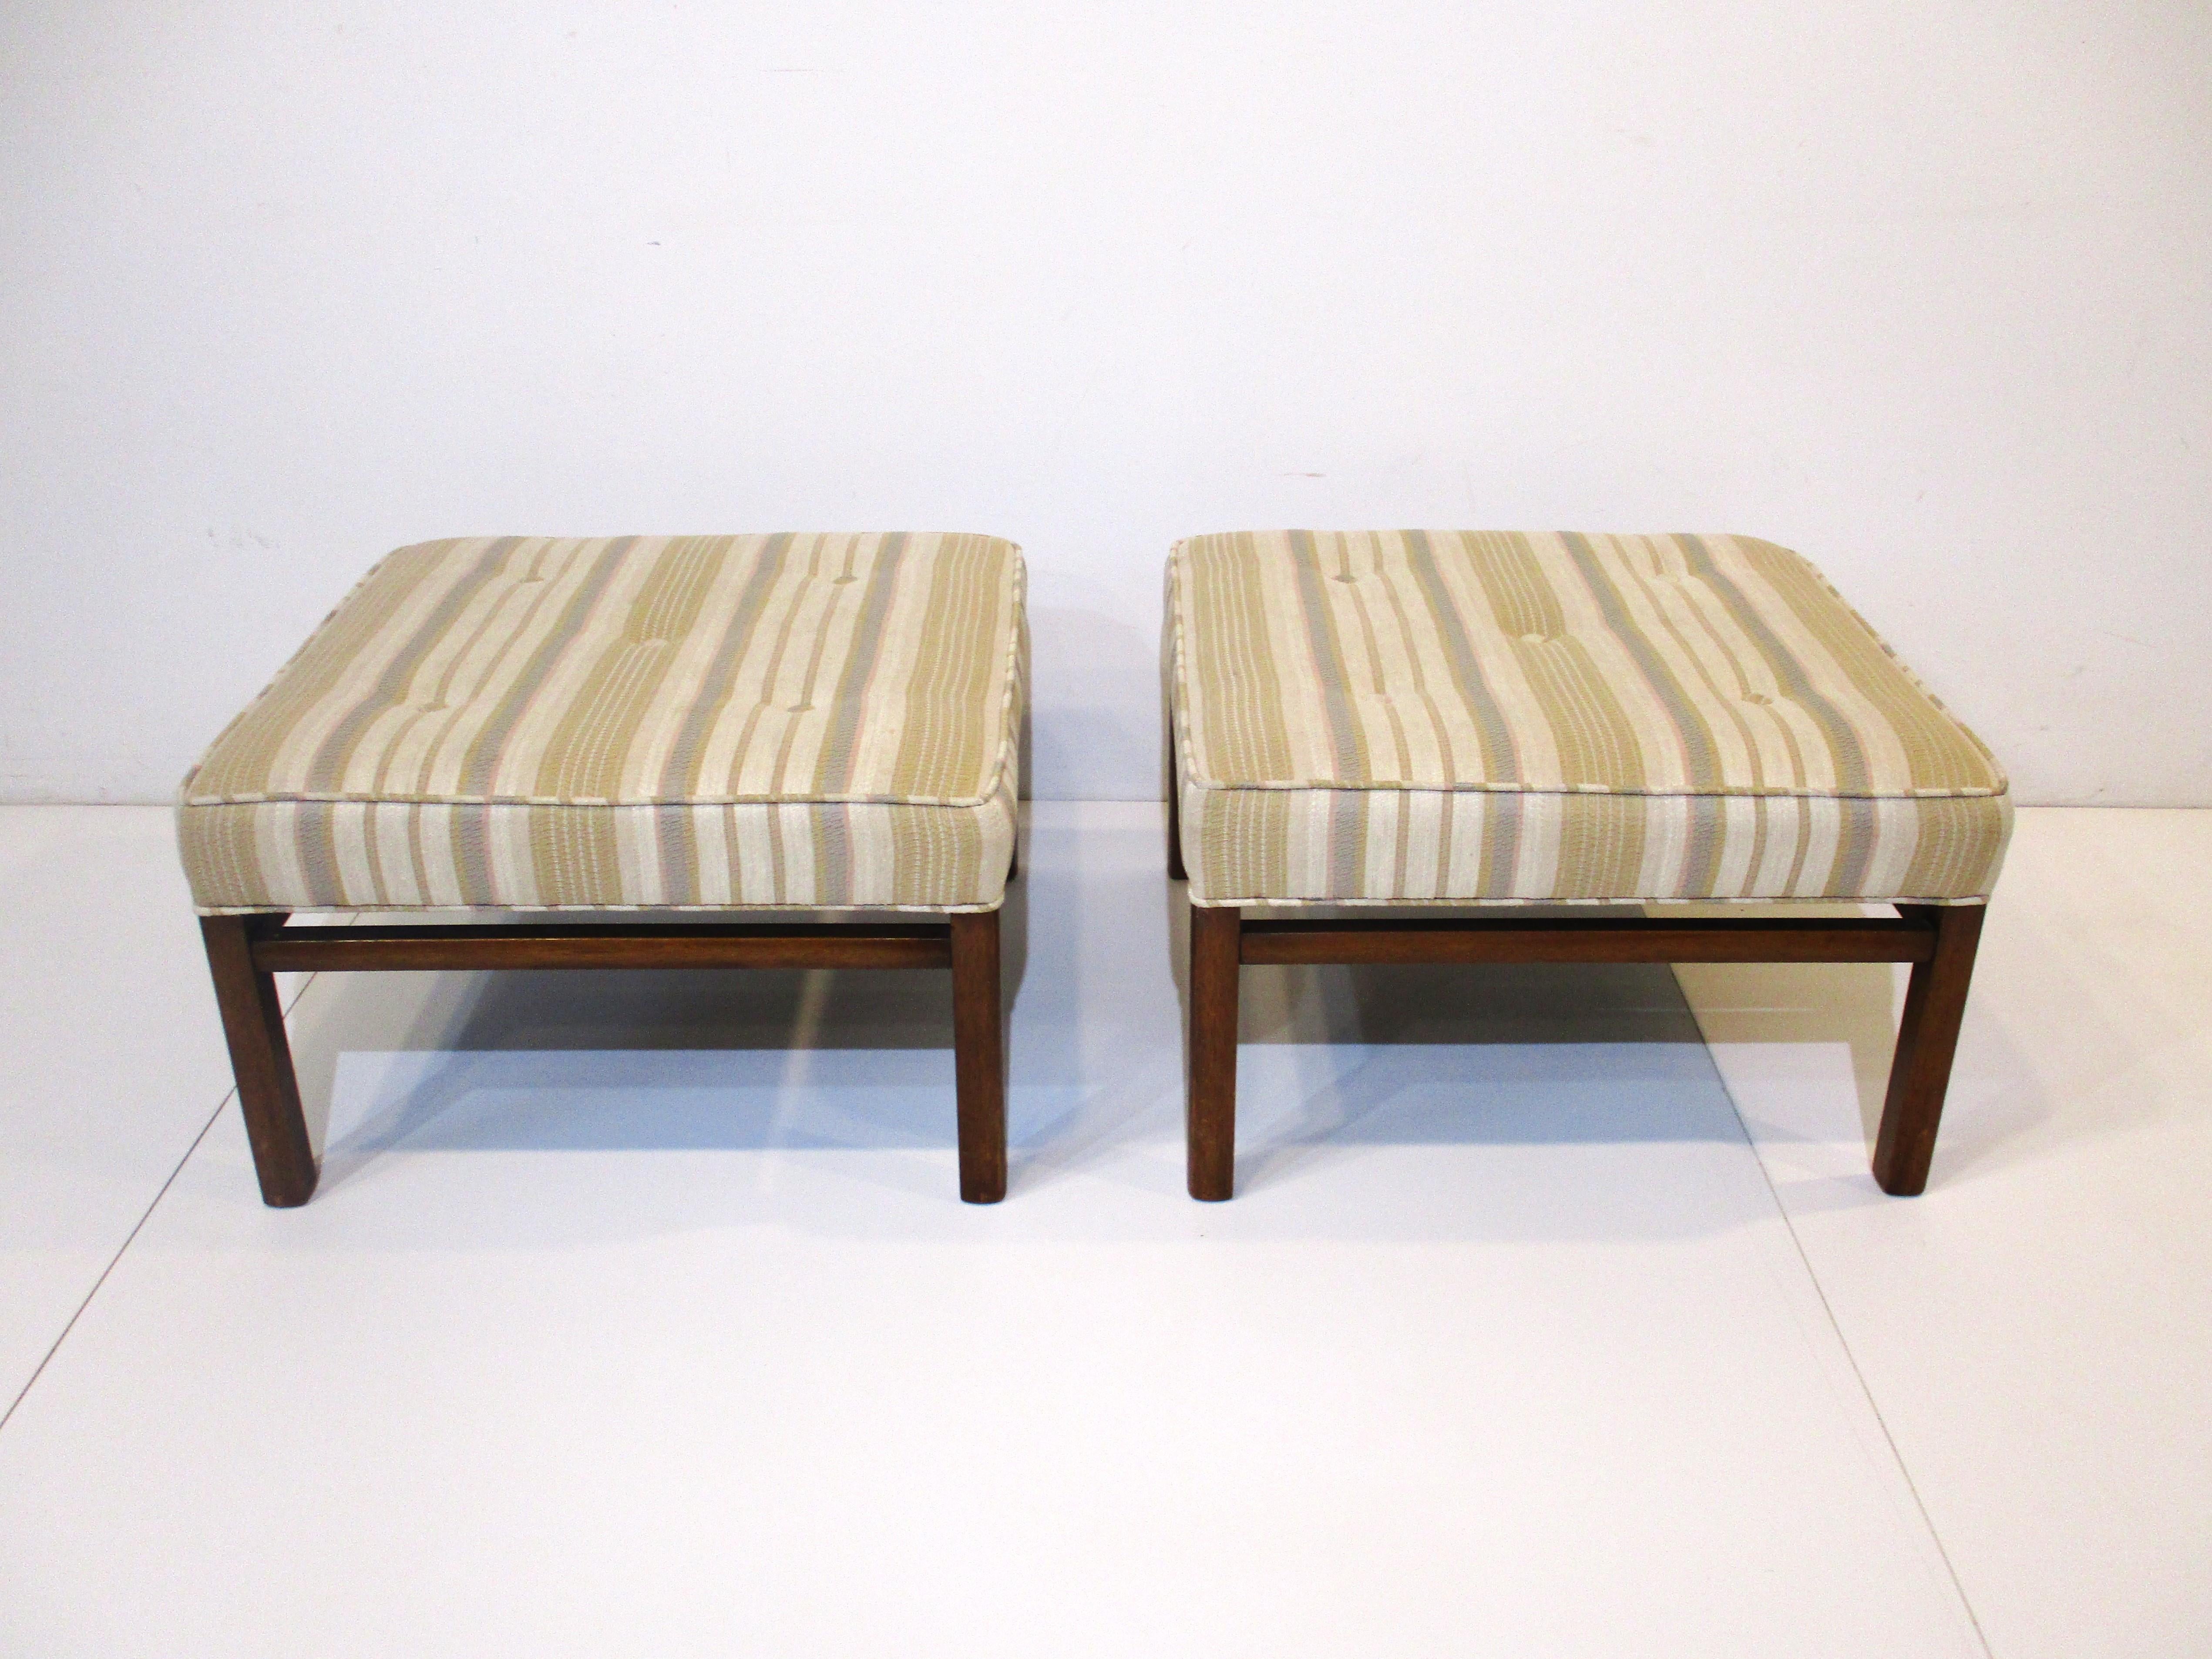 Upholstered Ottomans / Stools in the Style of Harvery Probber For Sale 3